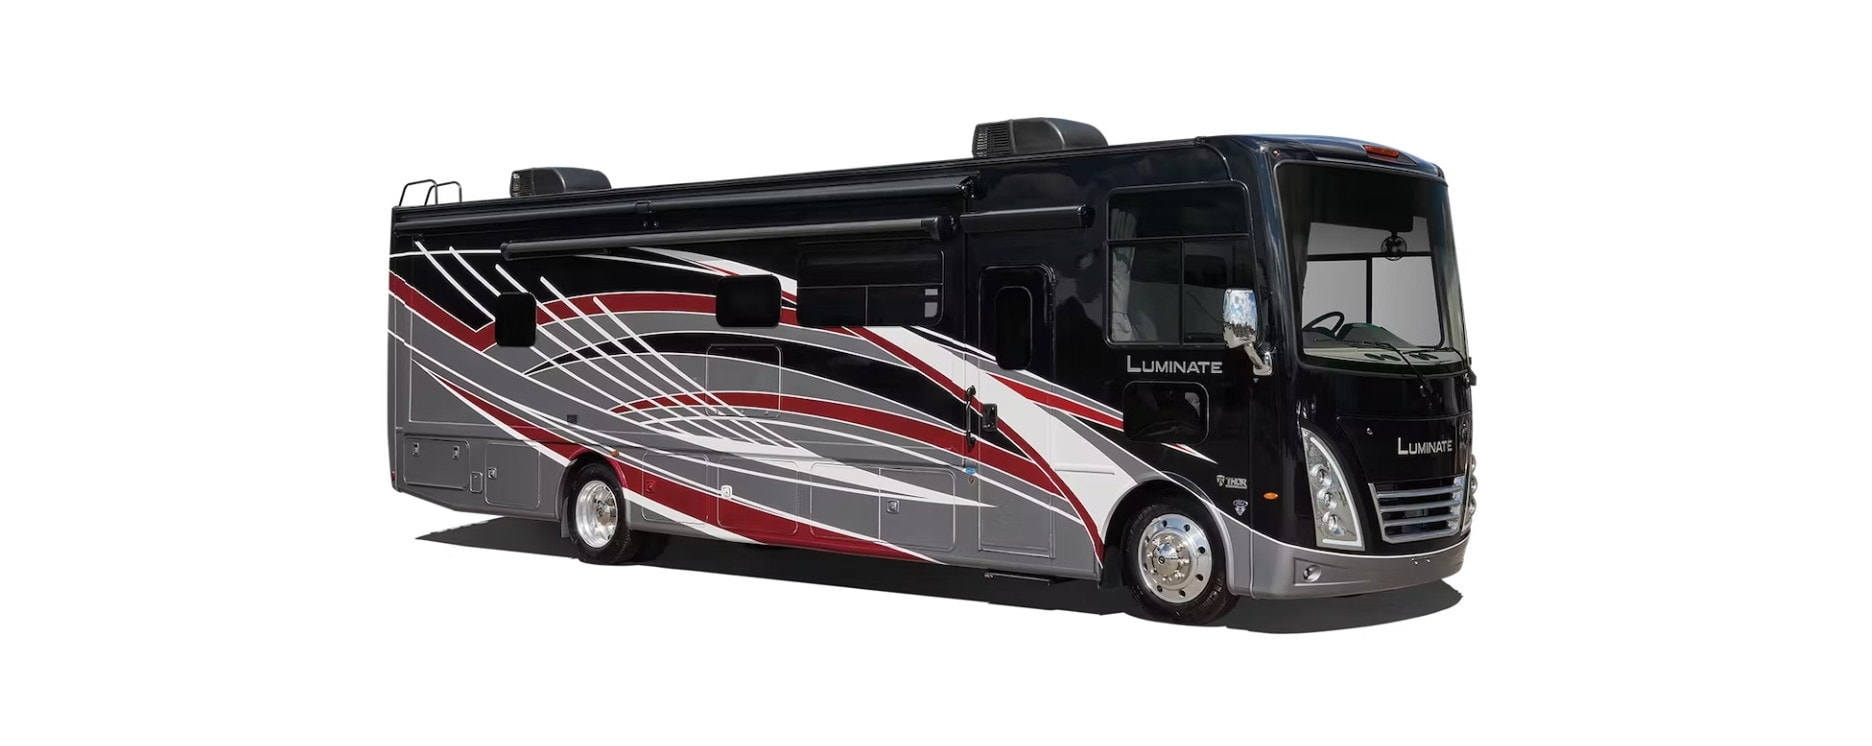 All-New Thor Luminate Motorhome Has It All and Is Perfect for a Small ...